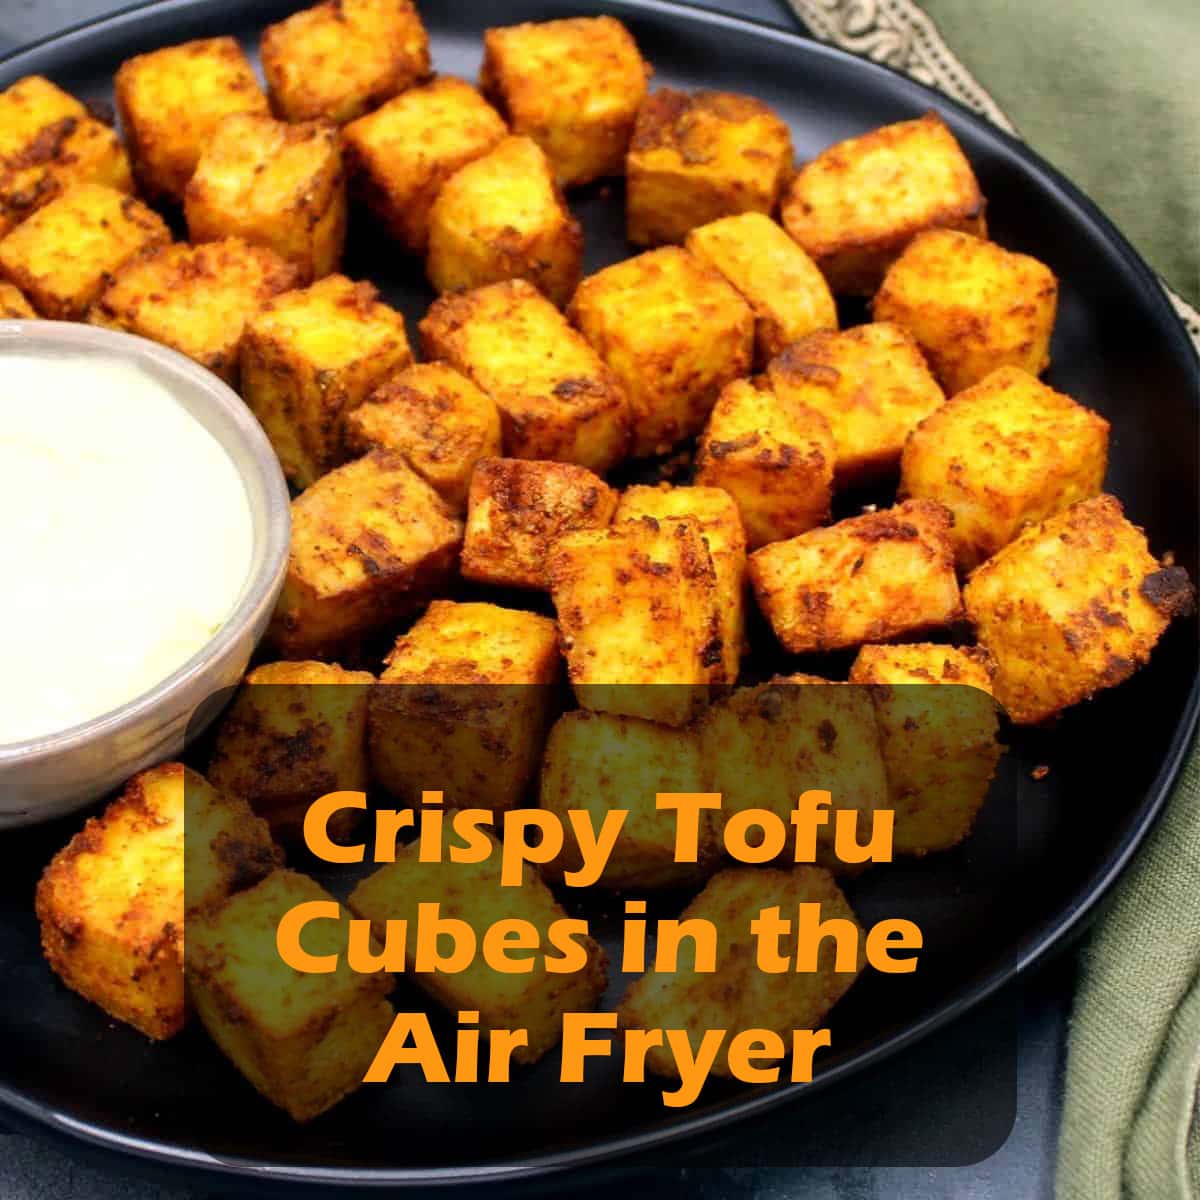 Crispy Tofu Cubes in the Air Fryer fryerly